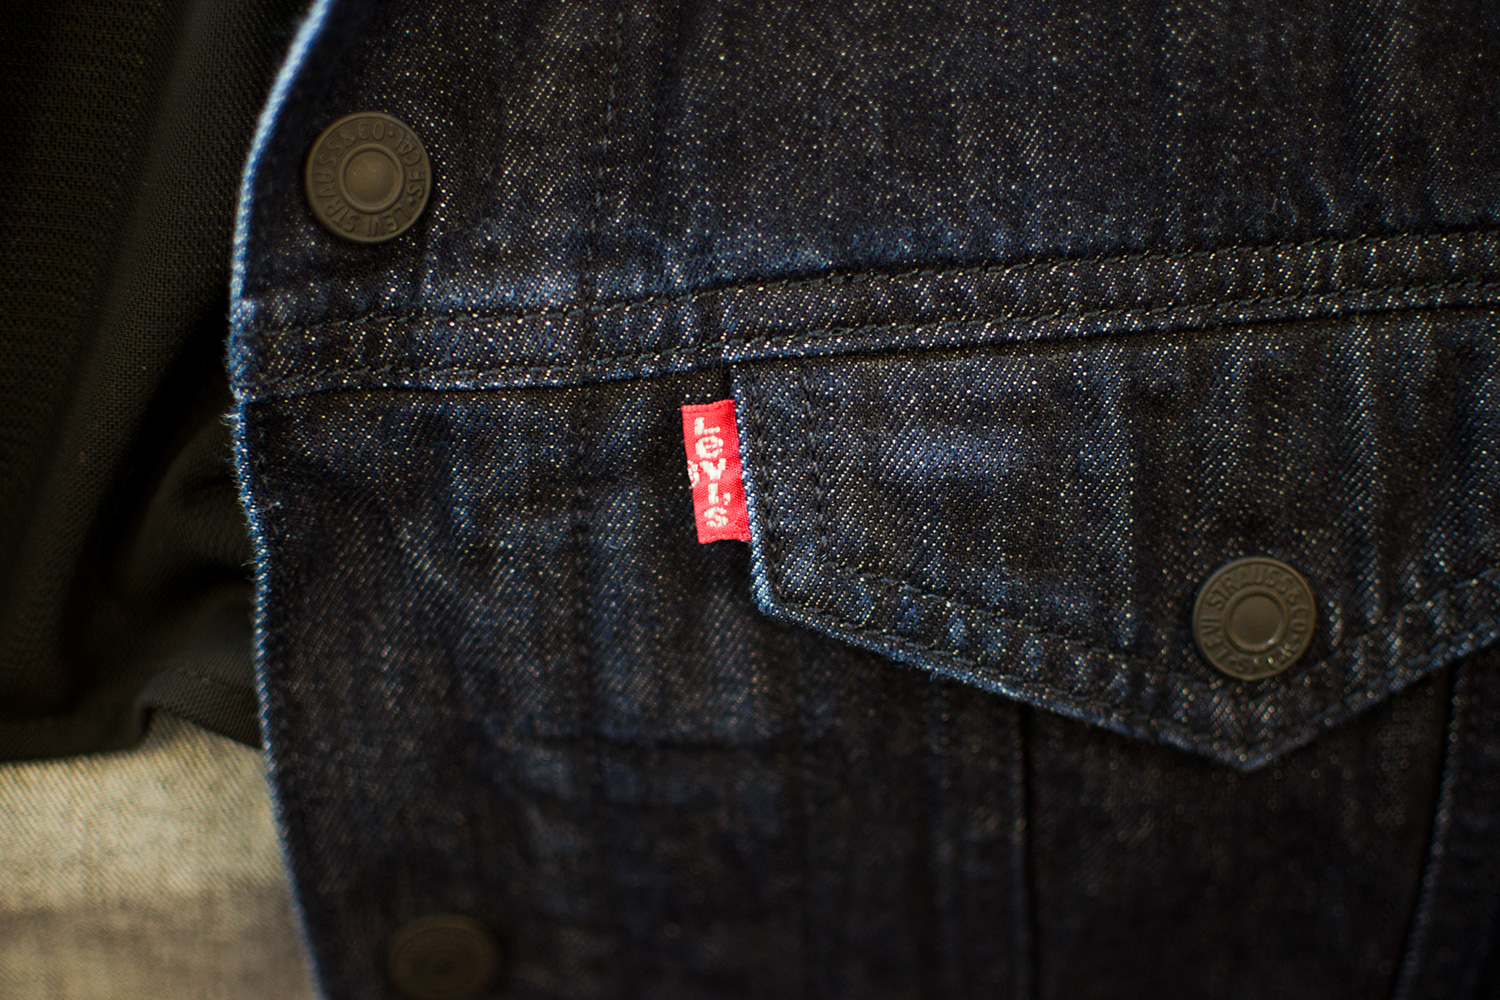 Google and Levi’s take on wearable tech with Jacquard denim jacket ...